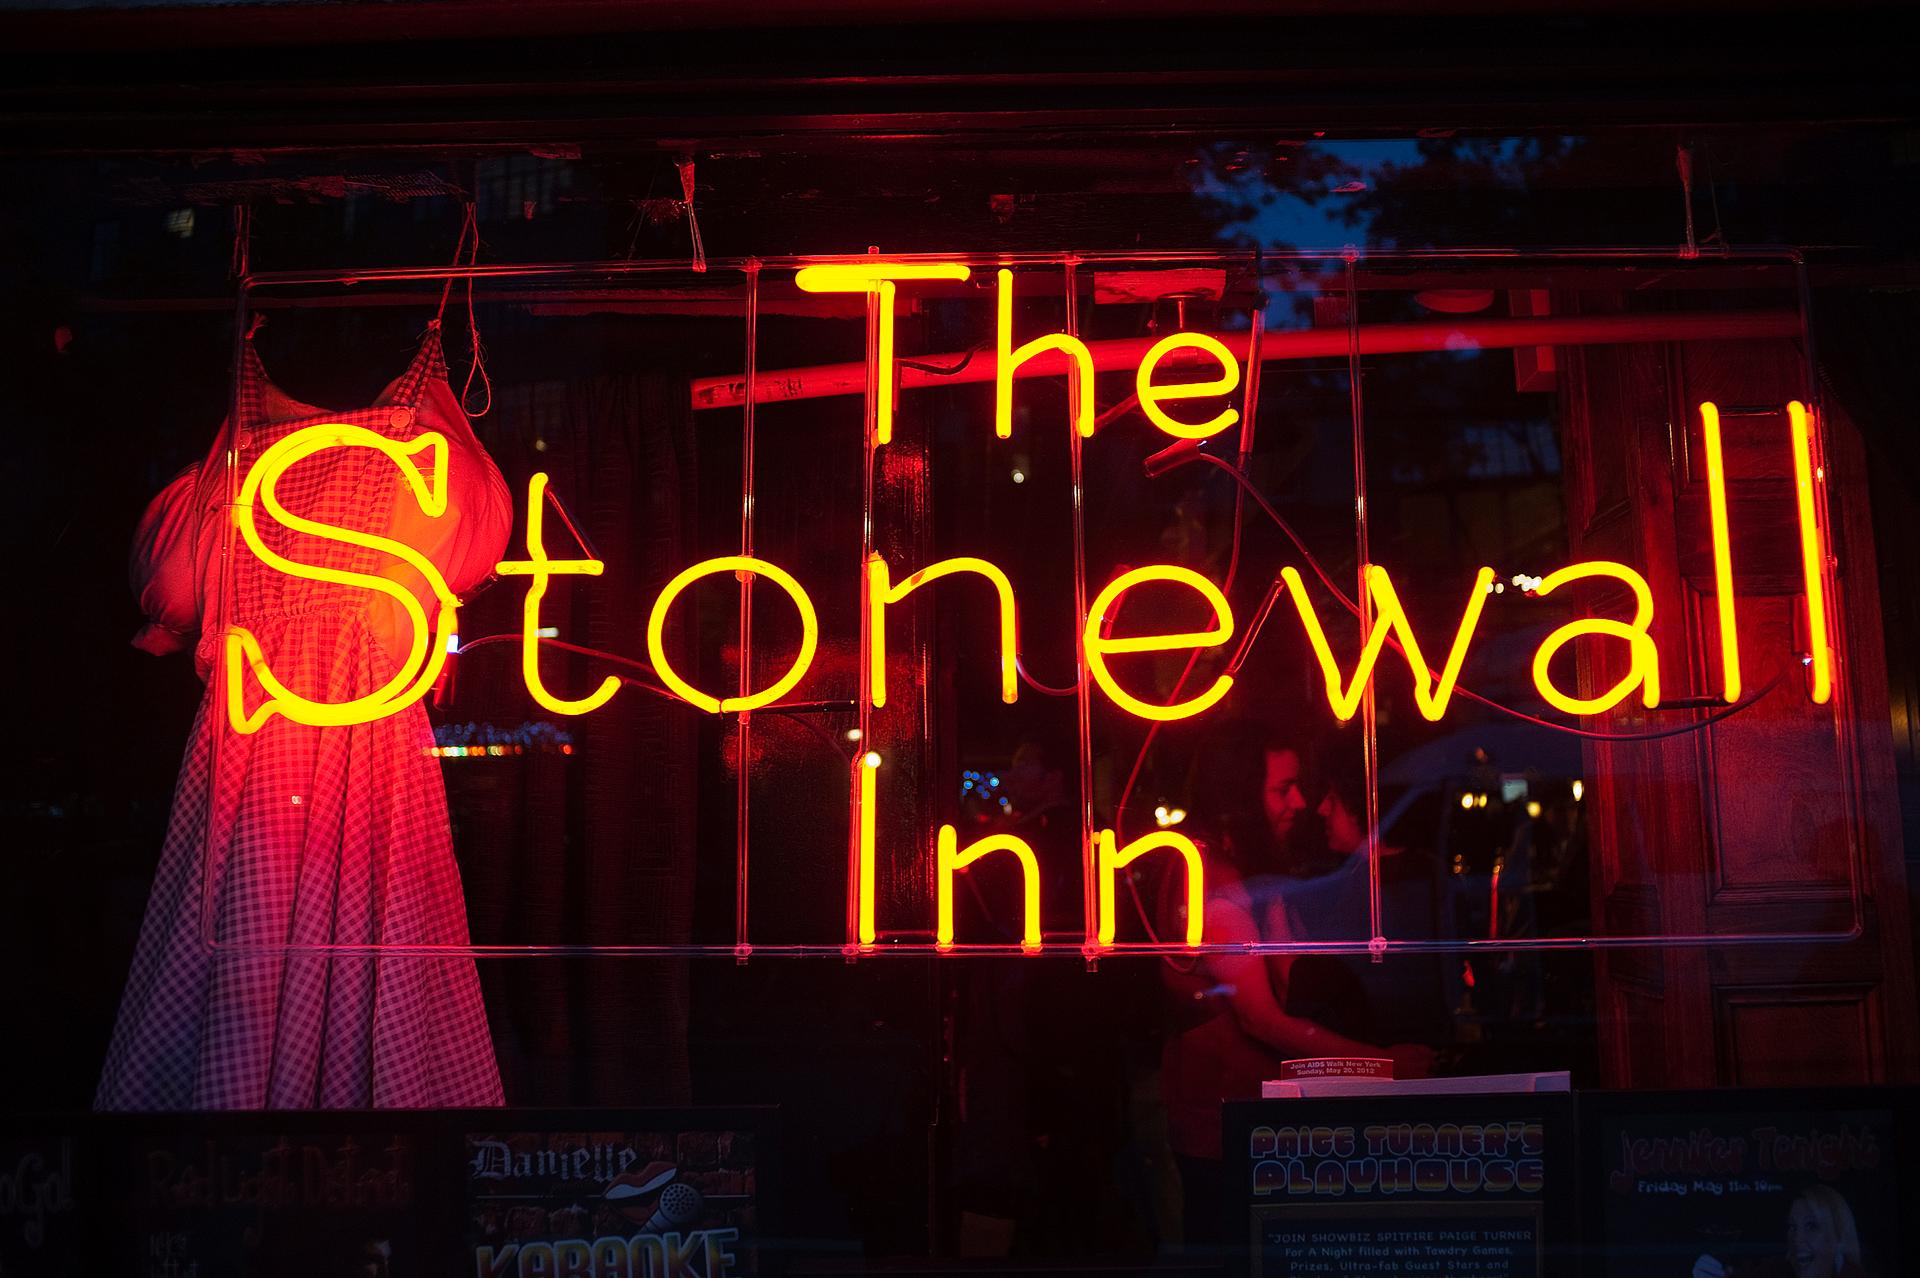 A neon sign saying "The Stonewall Inn" shines out a window.